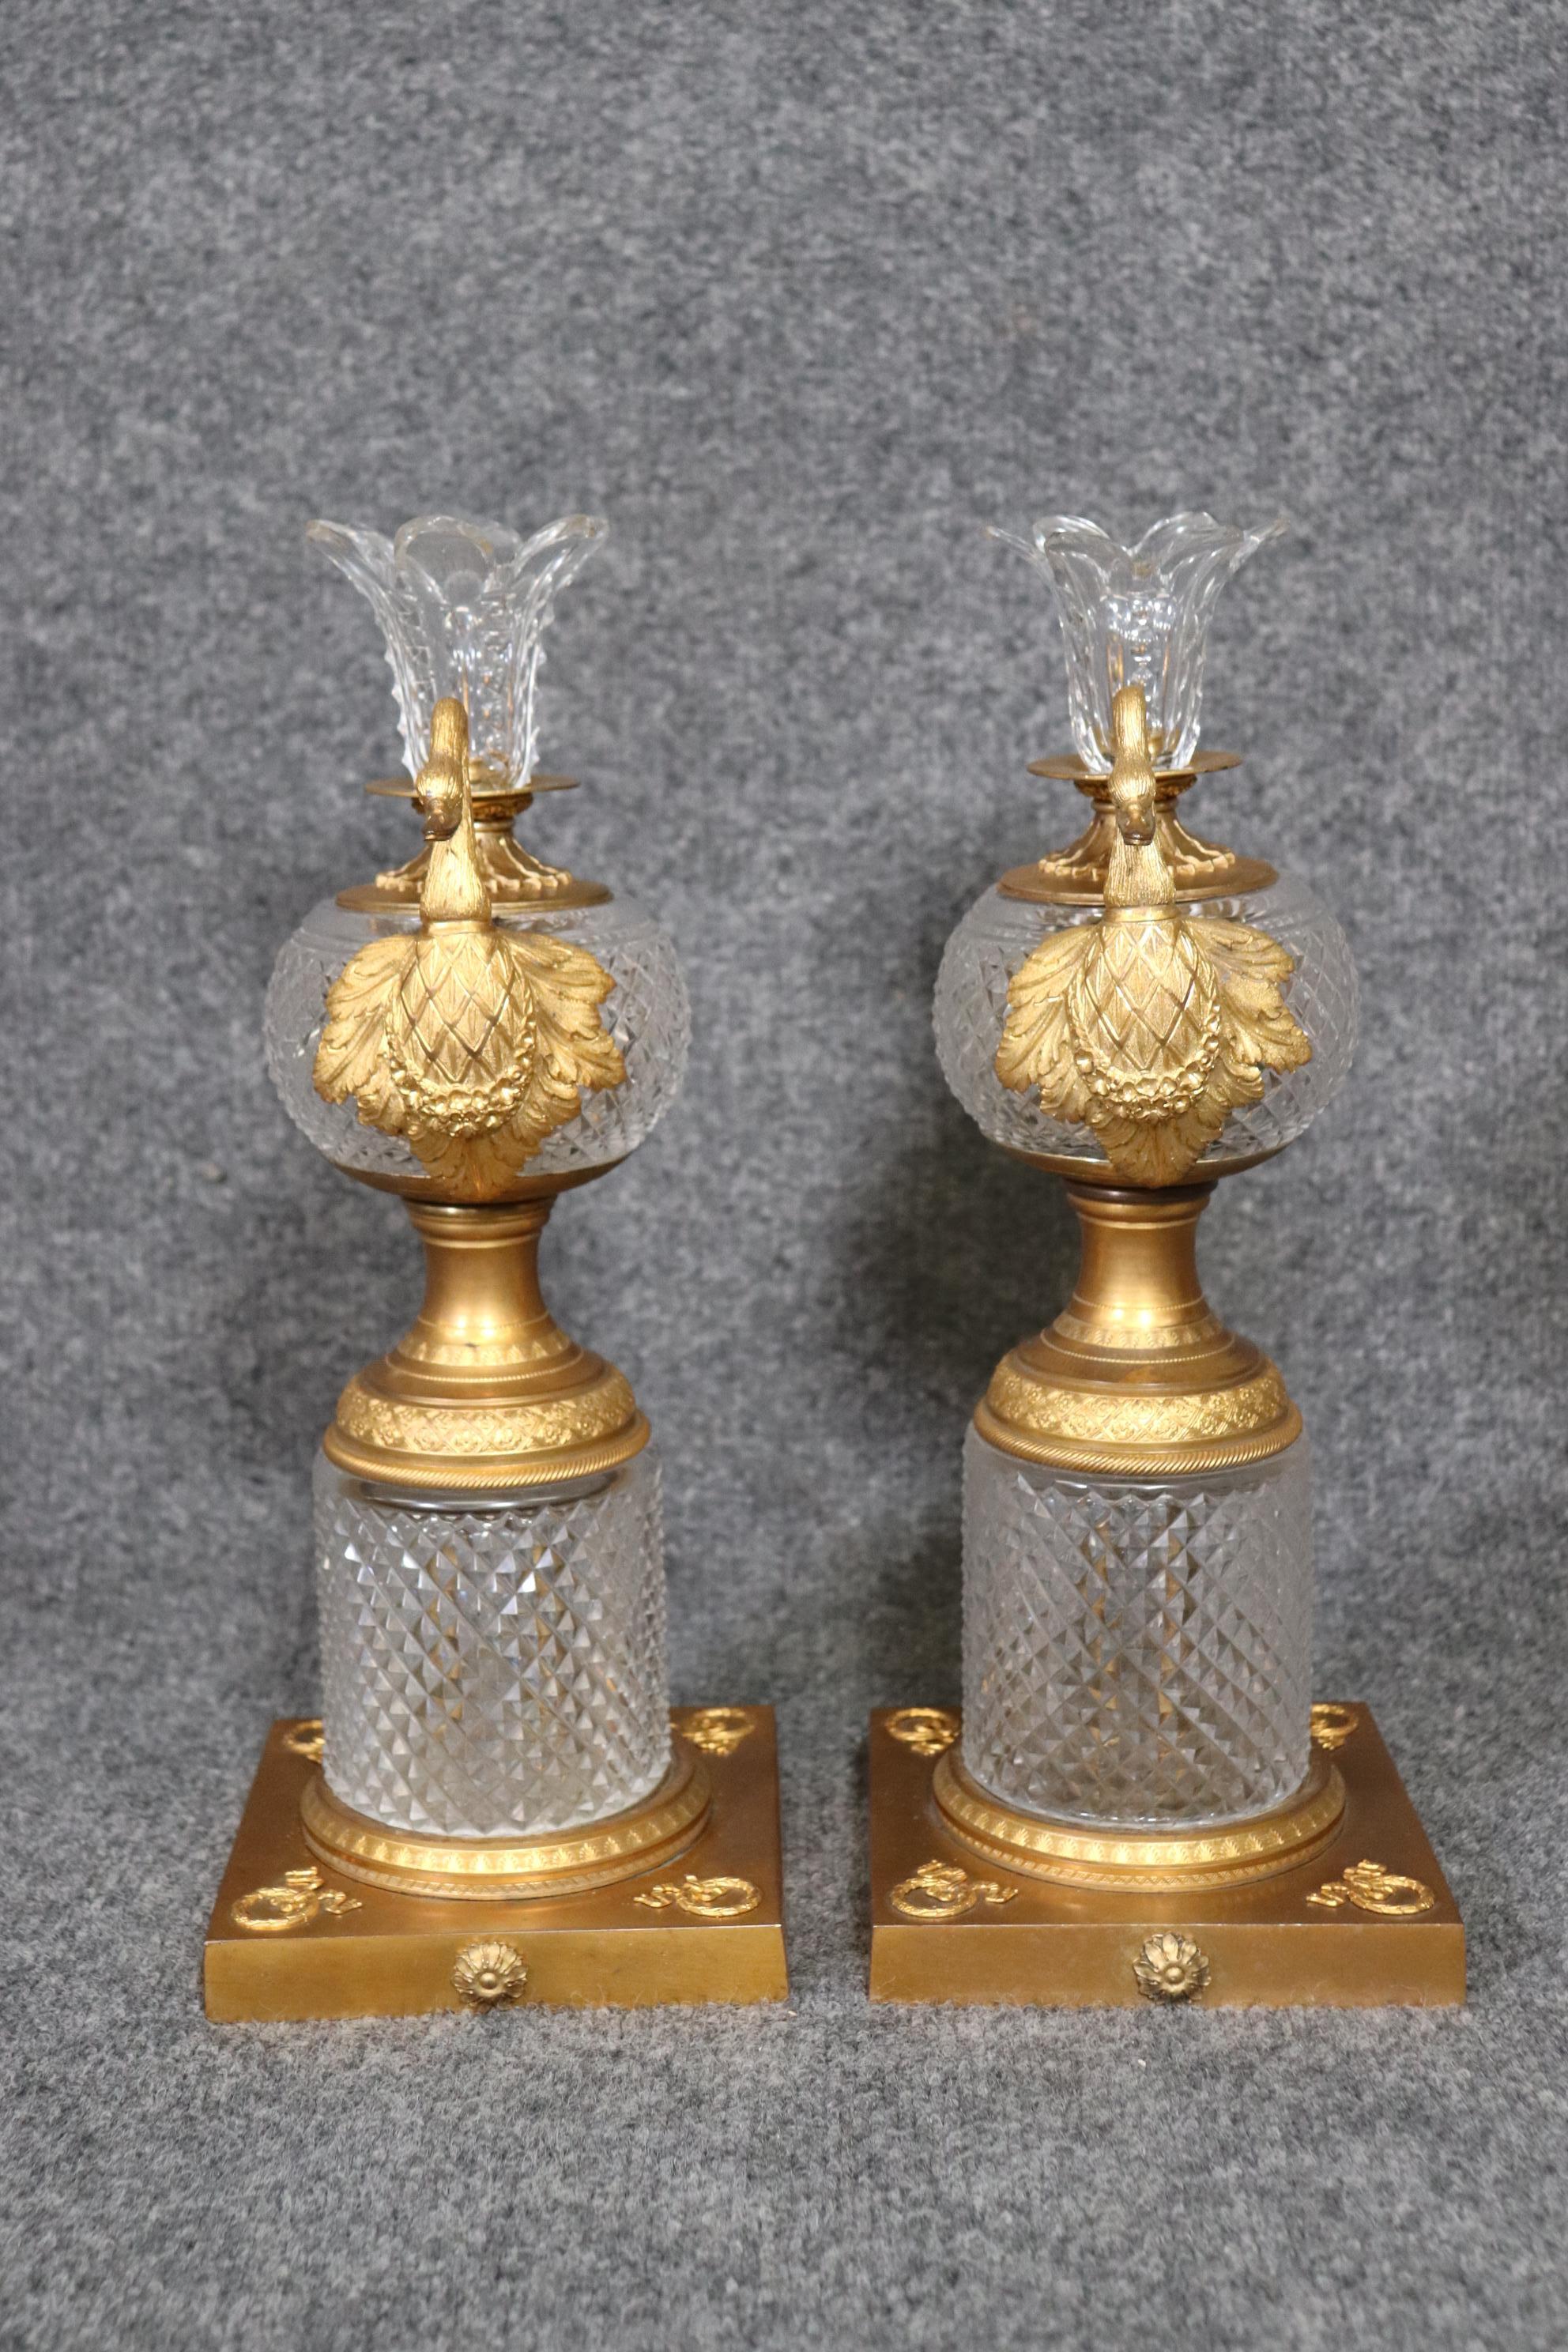 Mid-20th Century Exceptional Pair of Baccarat Quality Crystal Dore' Bronze Cassolettes with Swans